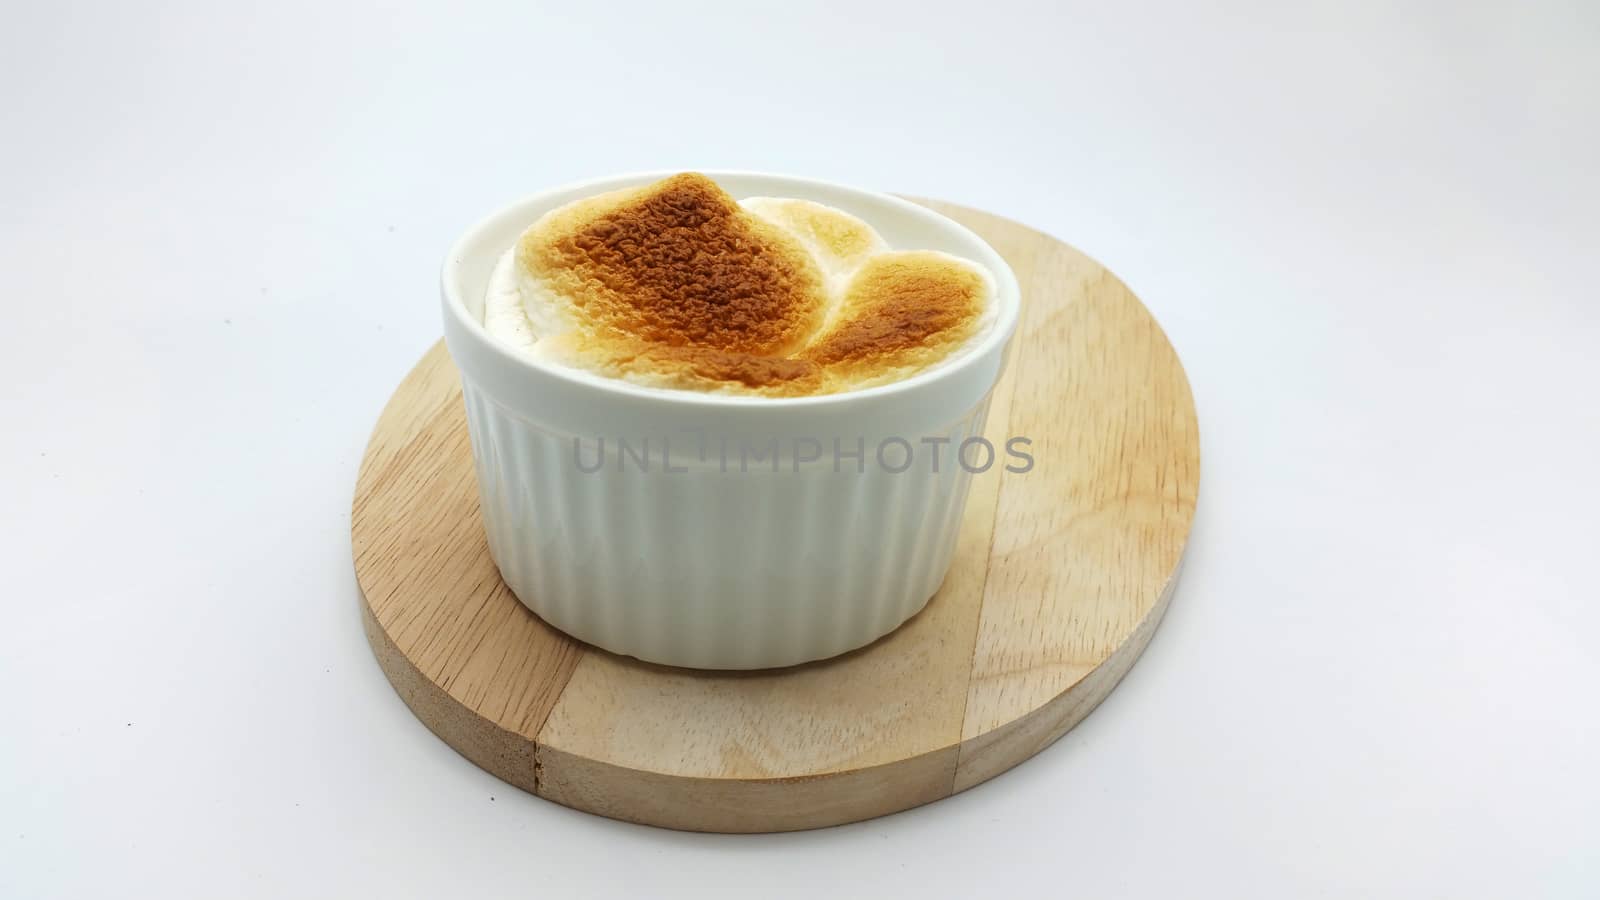 S'More dip (baked marshmellow and chocolate) in a ceramic cup on white background